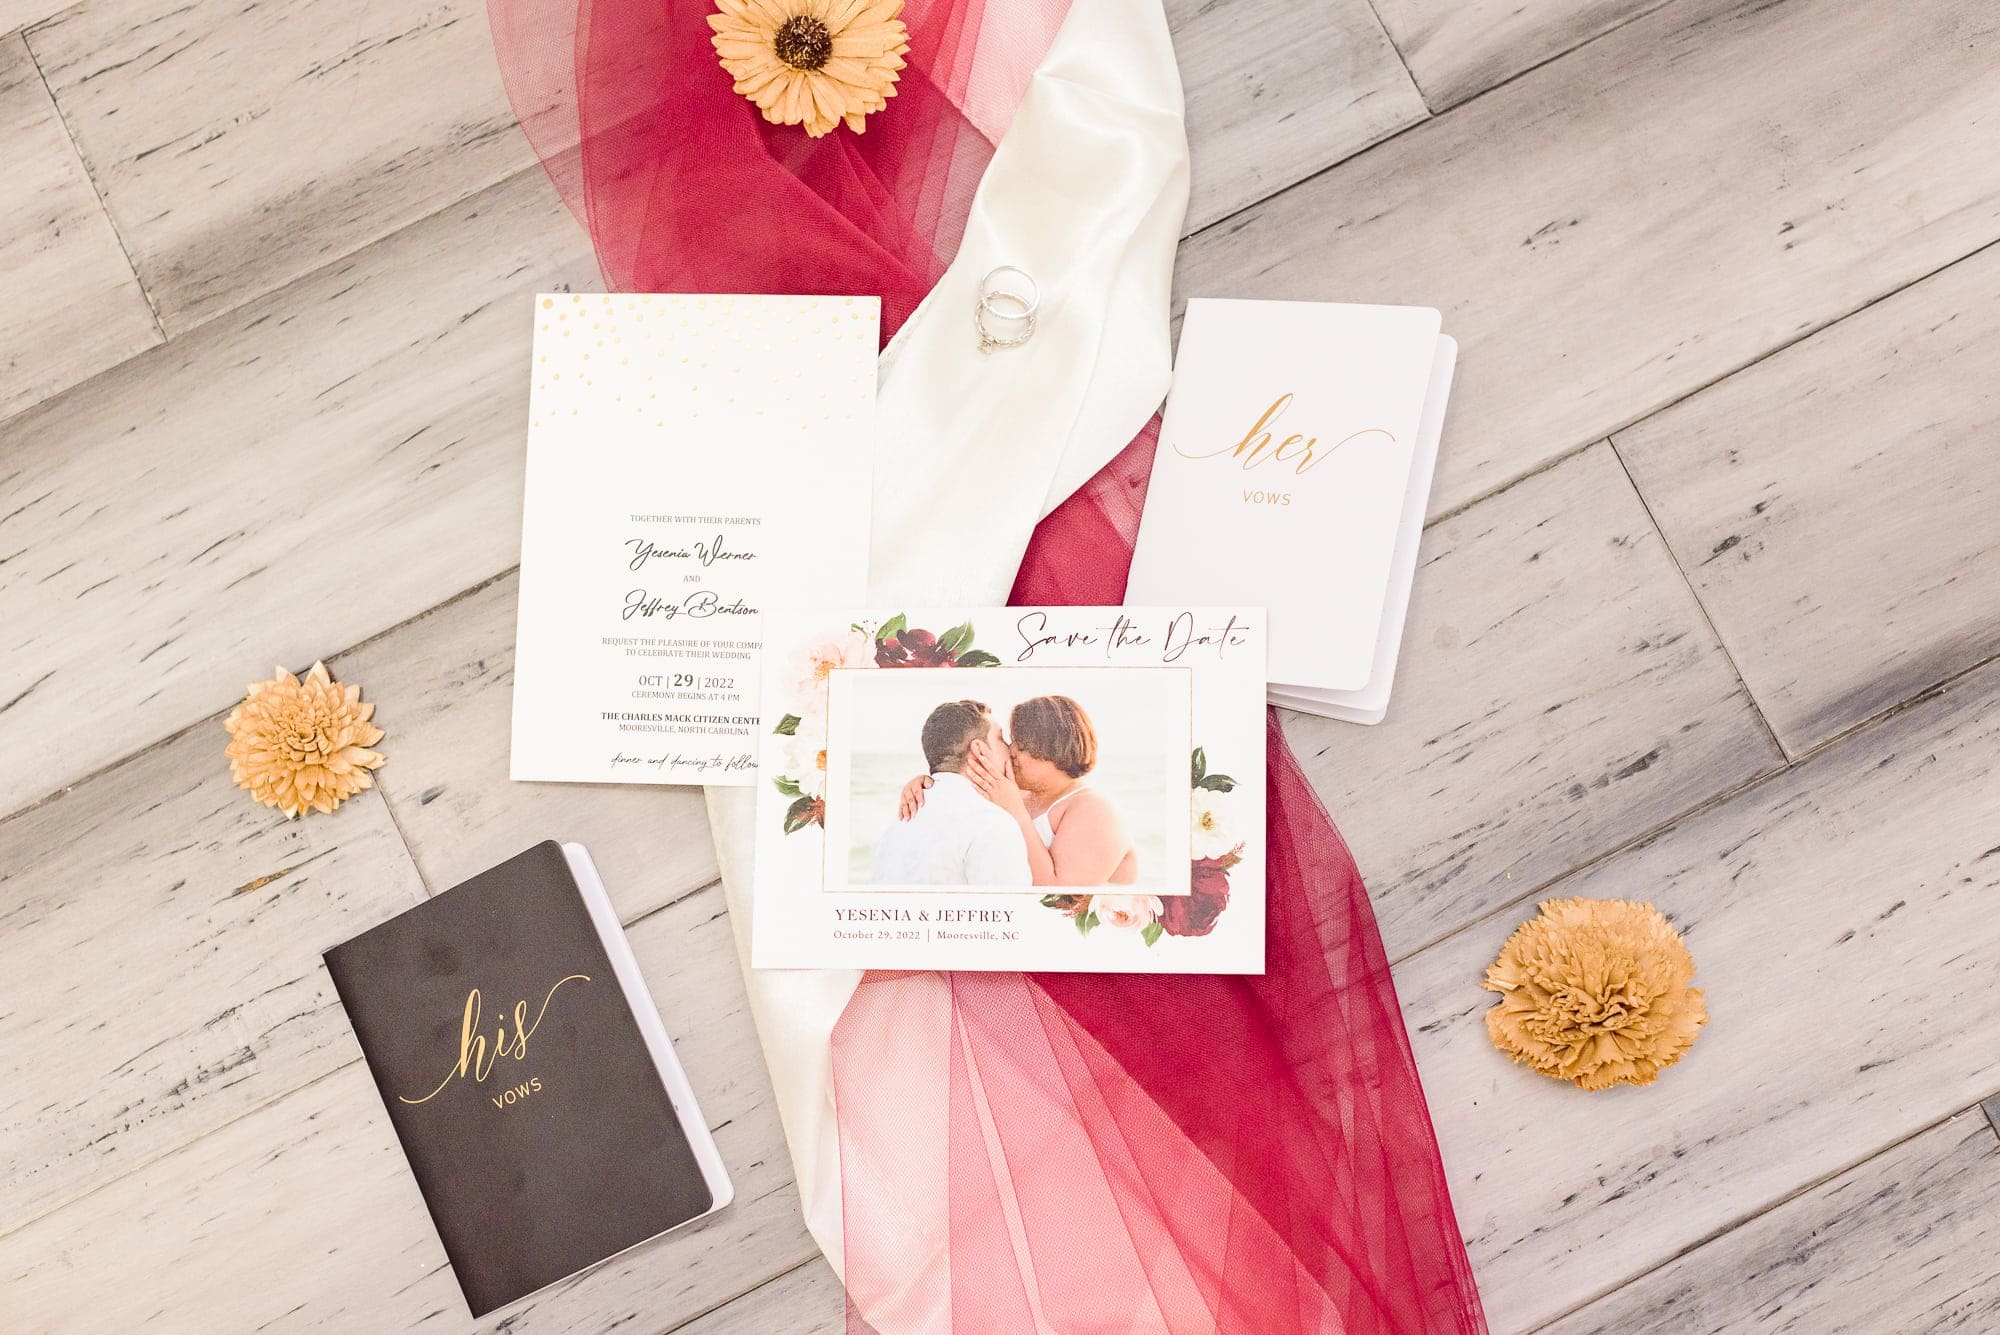 Invitations outlining the details of this wedding at the Charles Mack Citizen Center in Mooresville, NC.